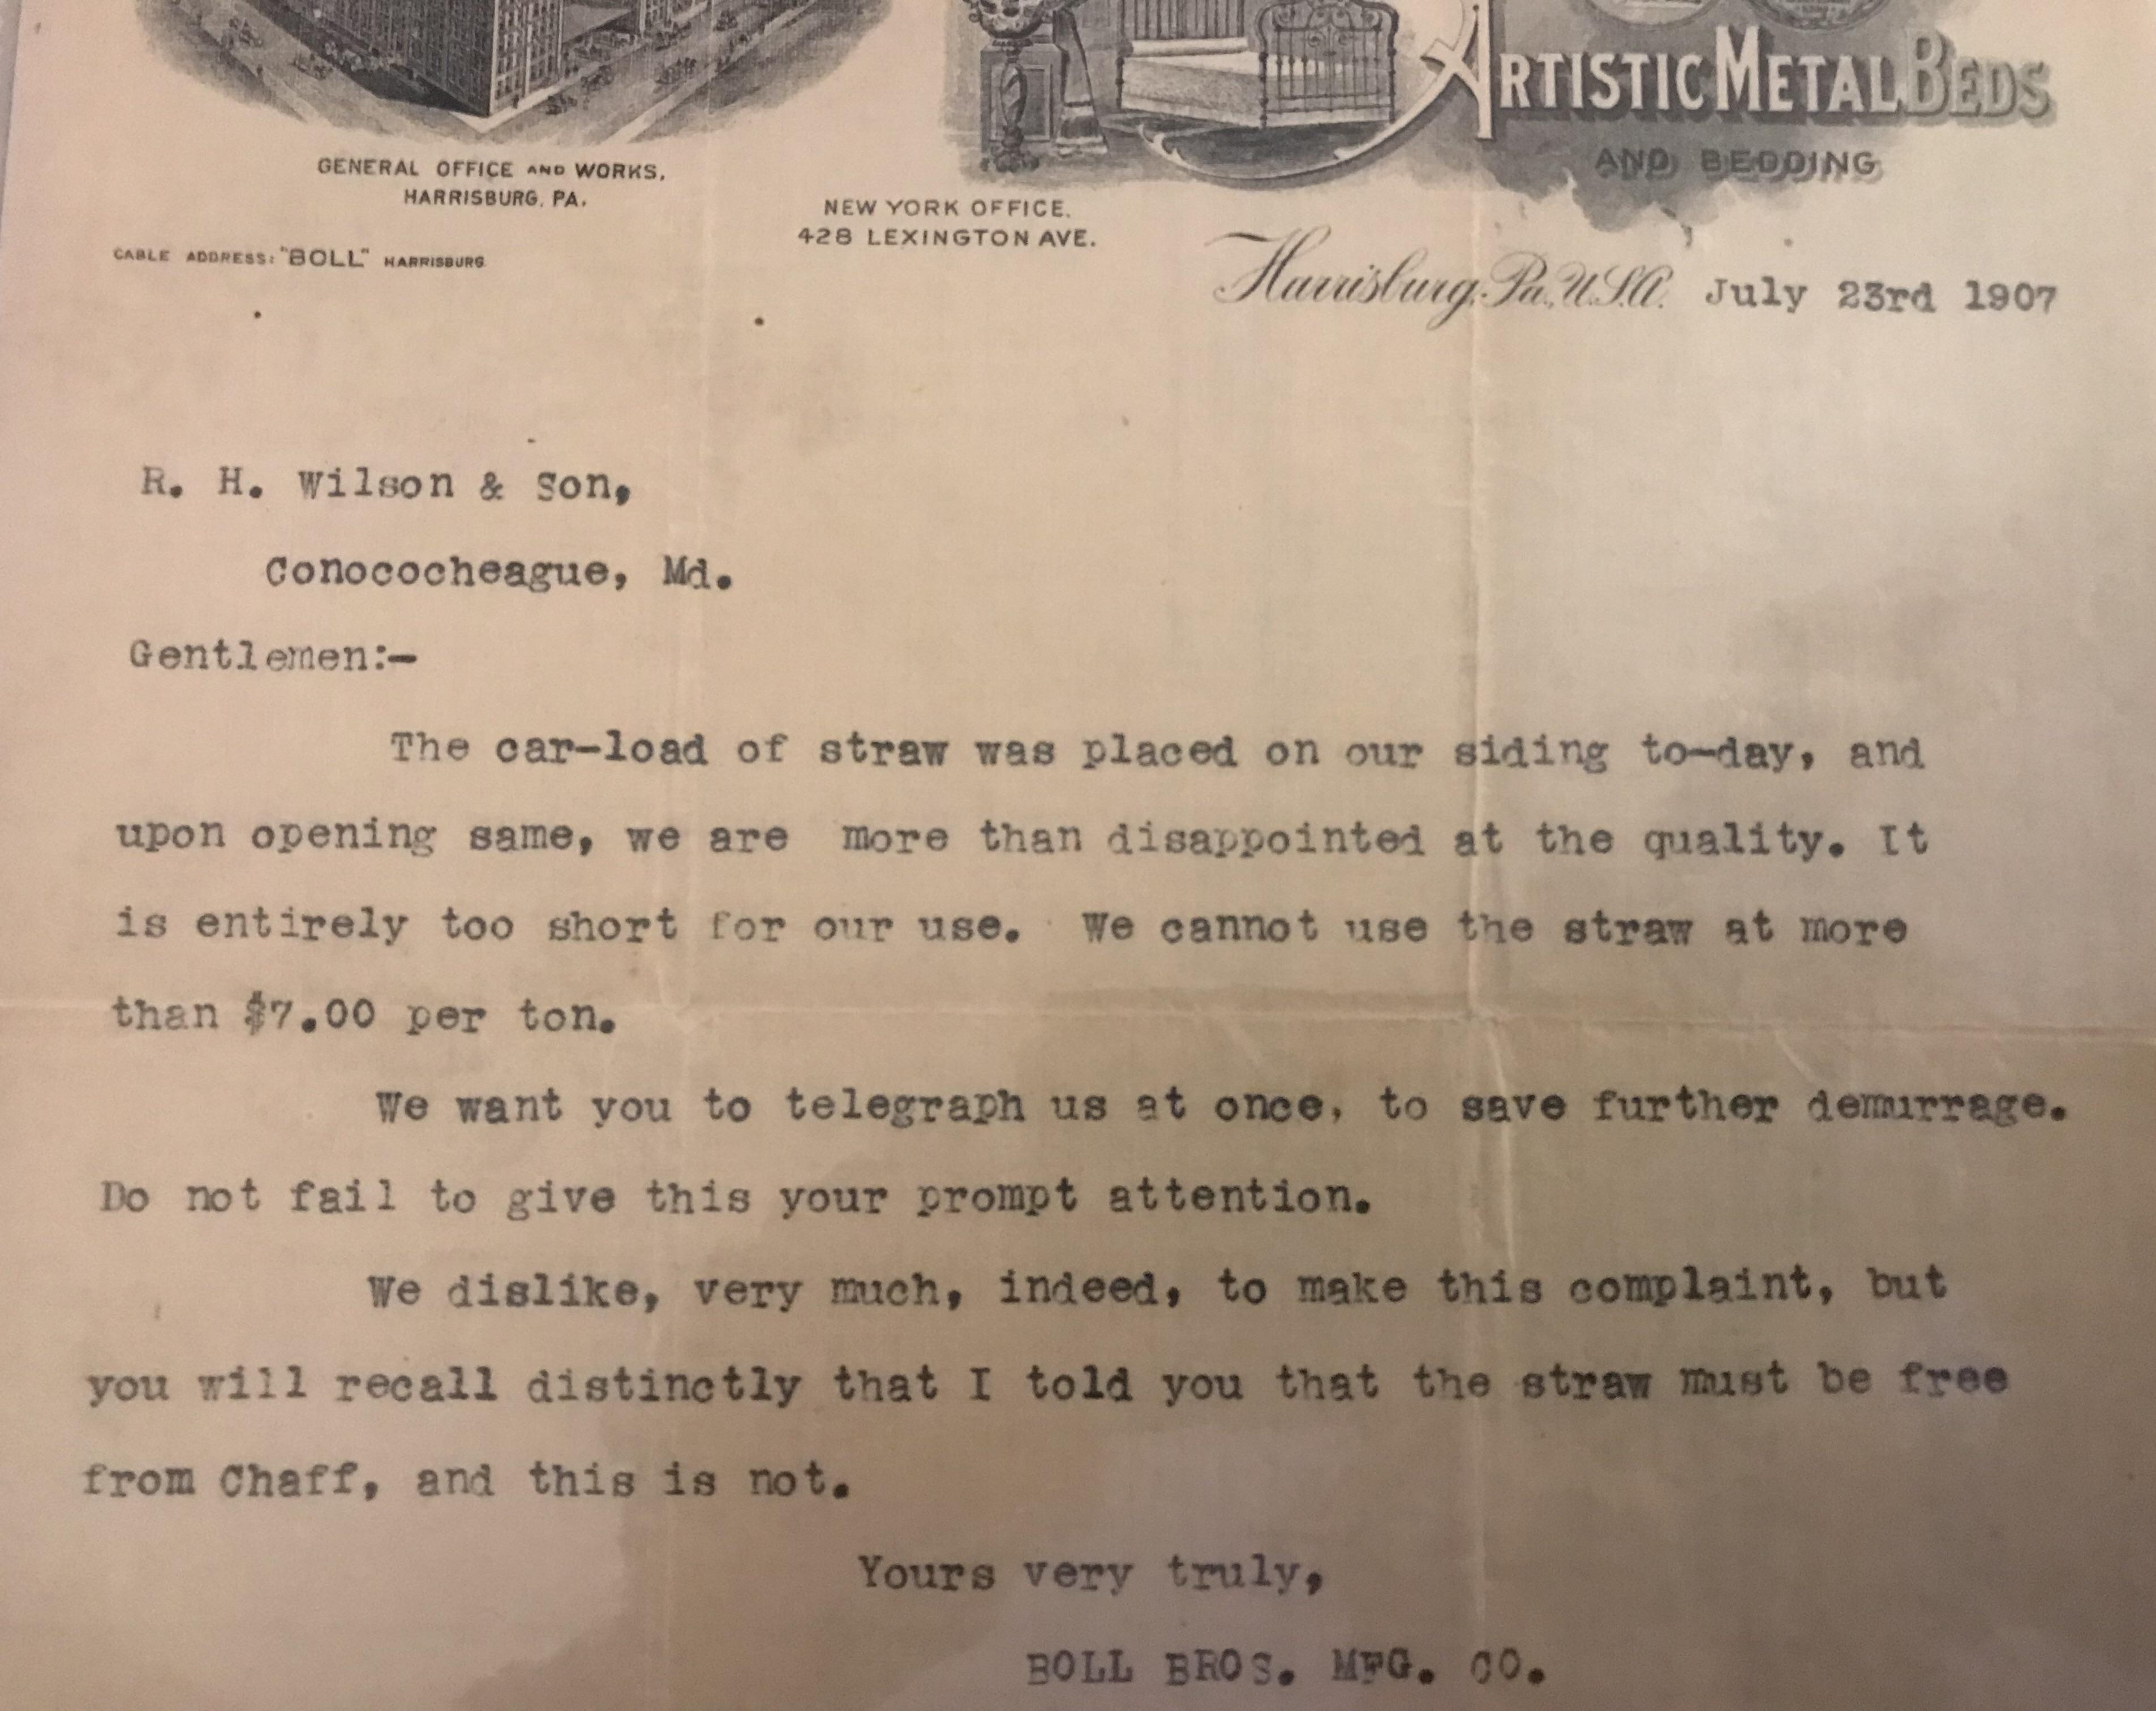 This letter of complaint from 1907